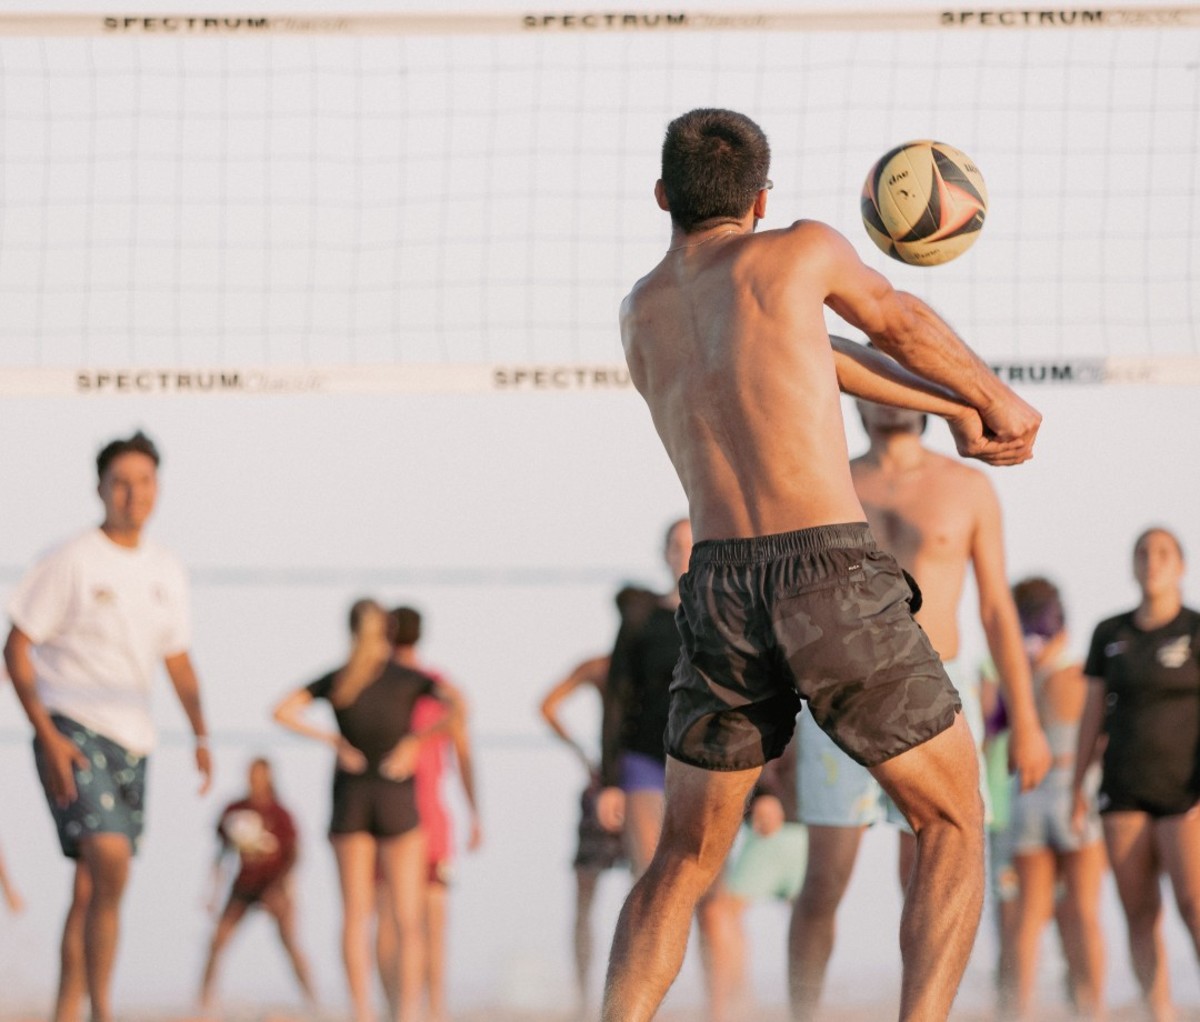 Shirtless man hitting volleyball off forearms at beach